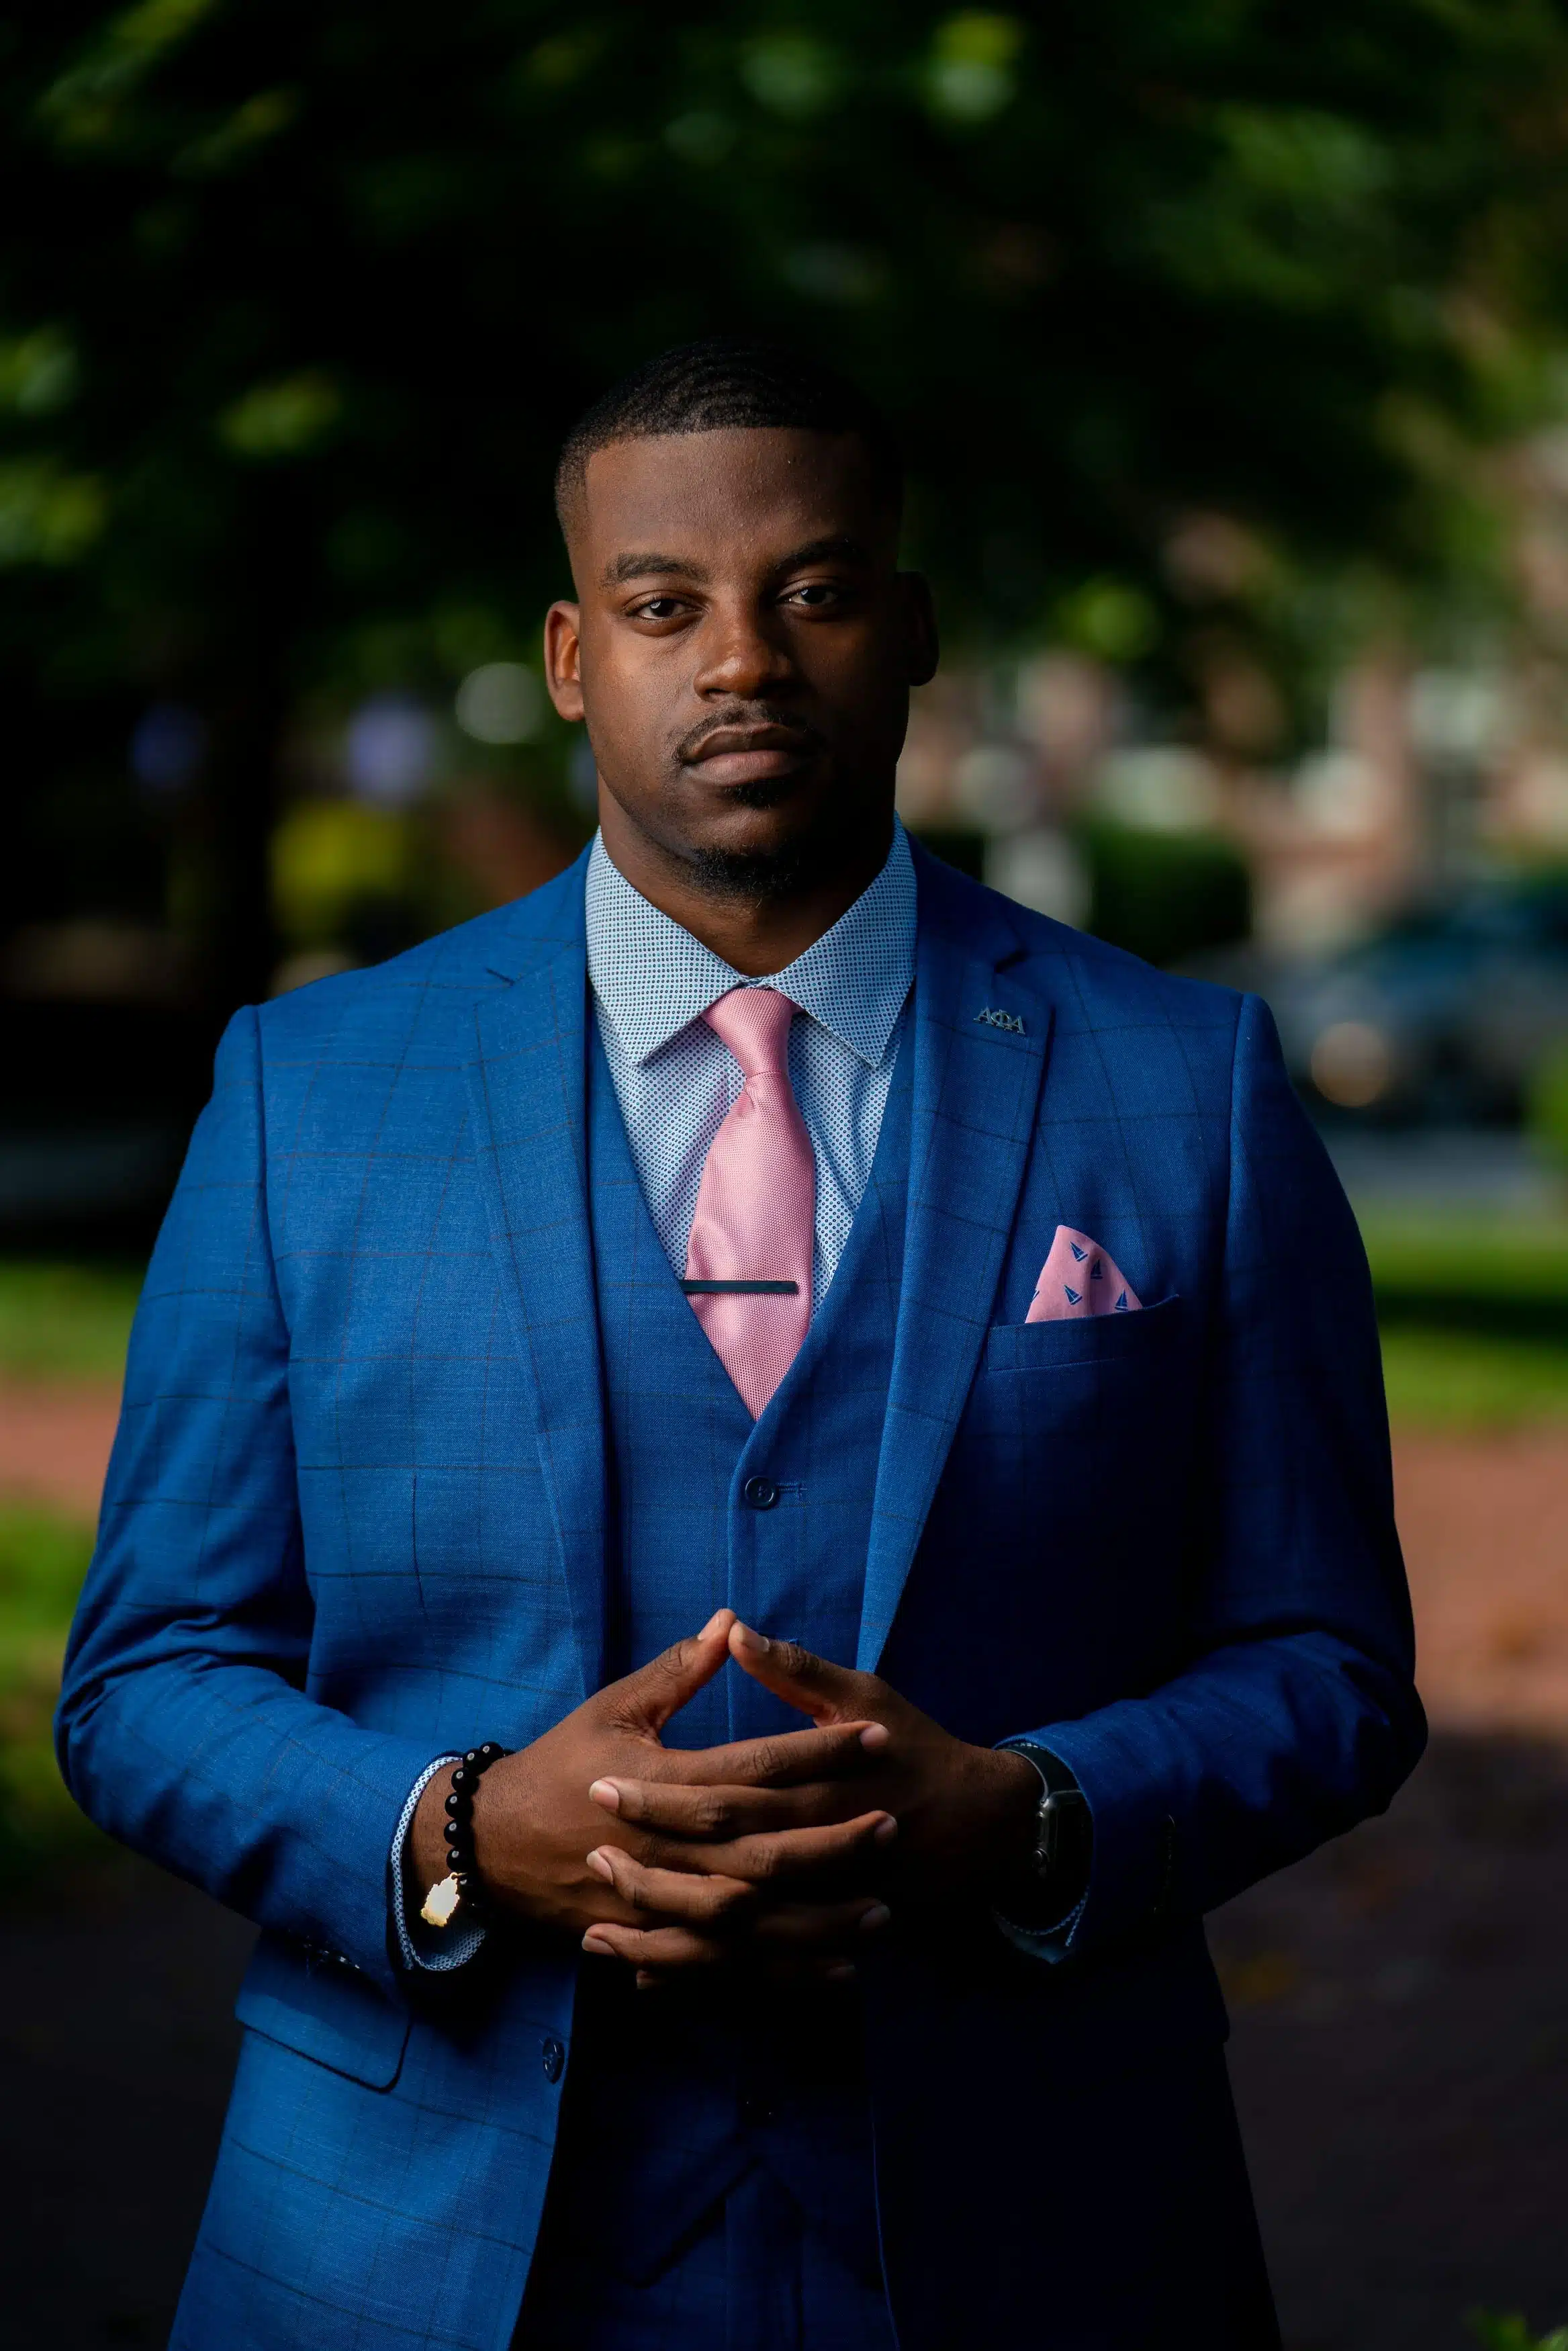 Black man wearing a blue suit with a pink tie. Posing outside of ECU Campus for his Graduation Photos.